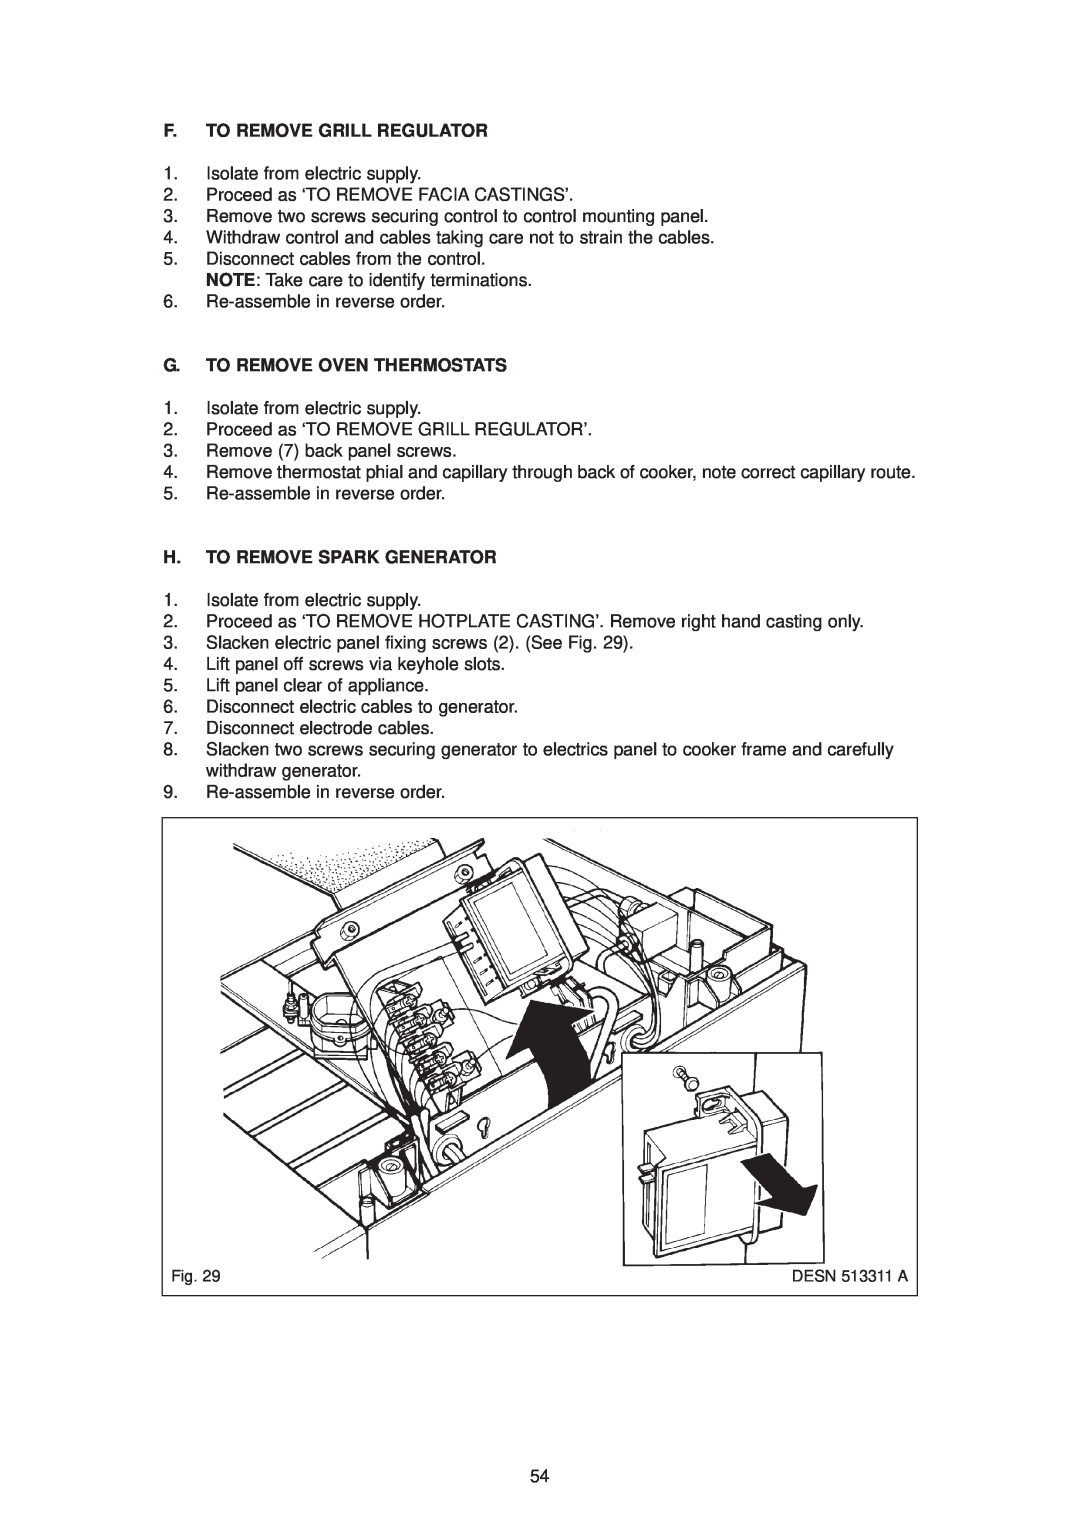 Aga Ranges DC6 (FFD) owner manual F. To Remove Grill Regulator, G. To Remove Oven Thermostats, H. To Remove Spark Generator 